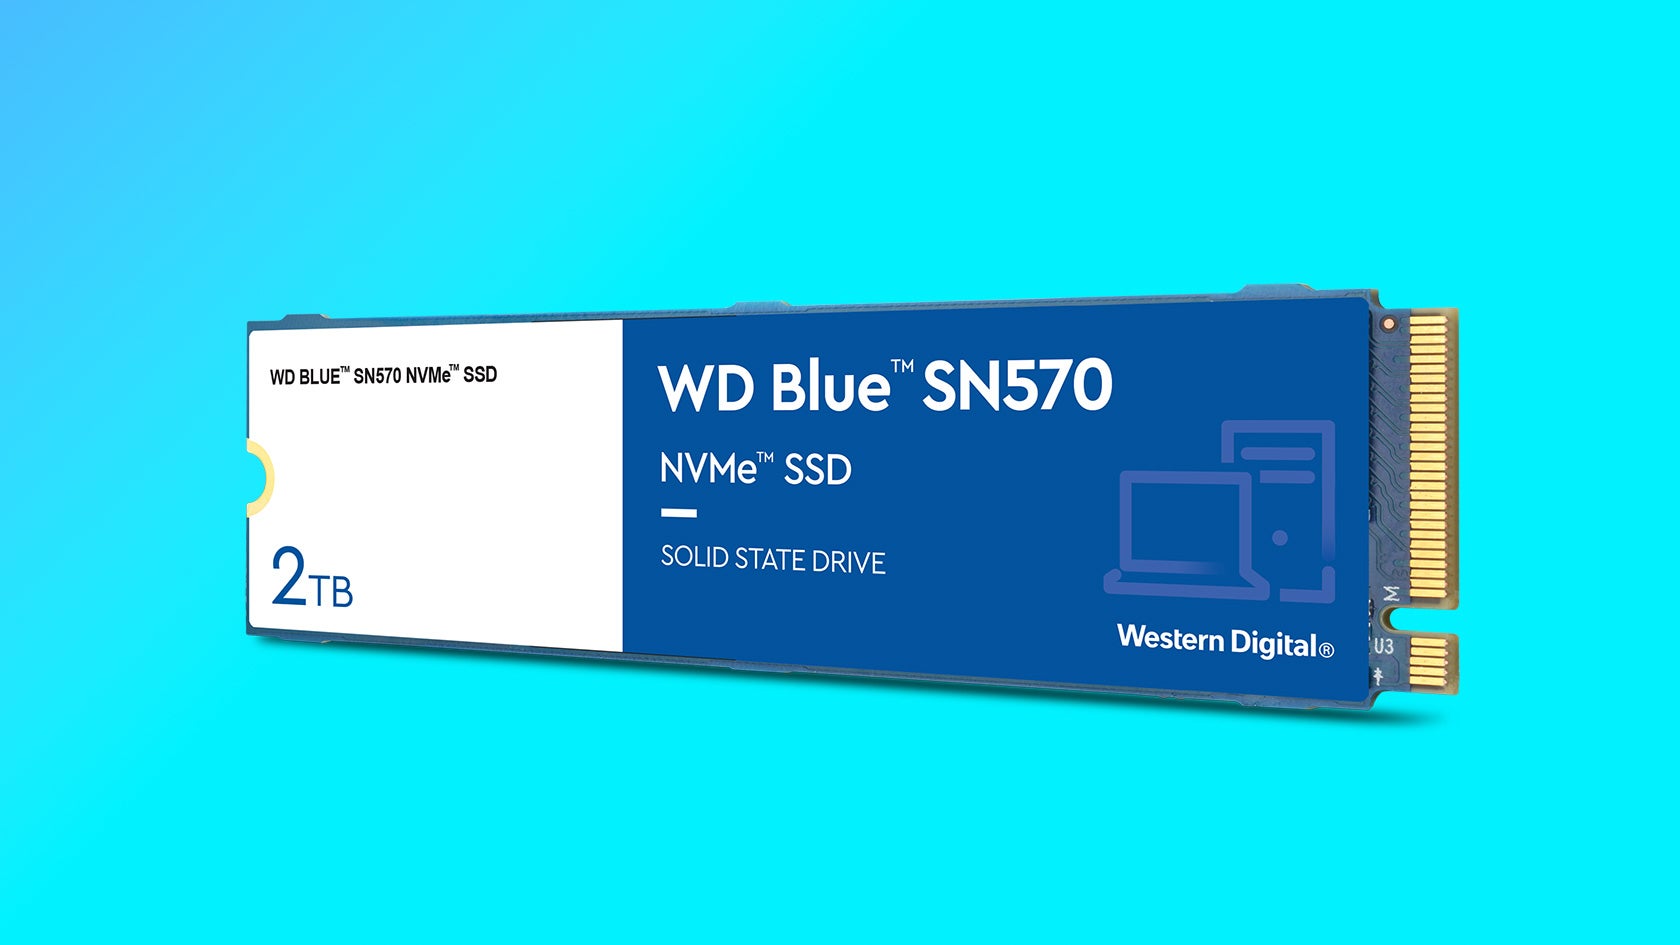 Save over a third on this WD Blue SN570 NVMe SSD on Prime Day